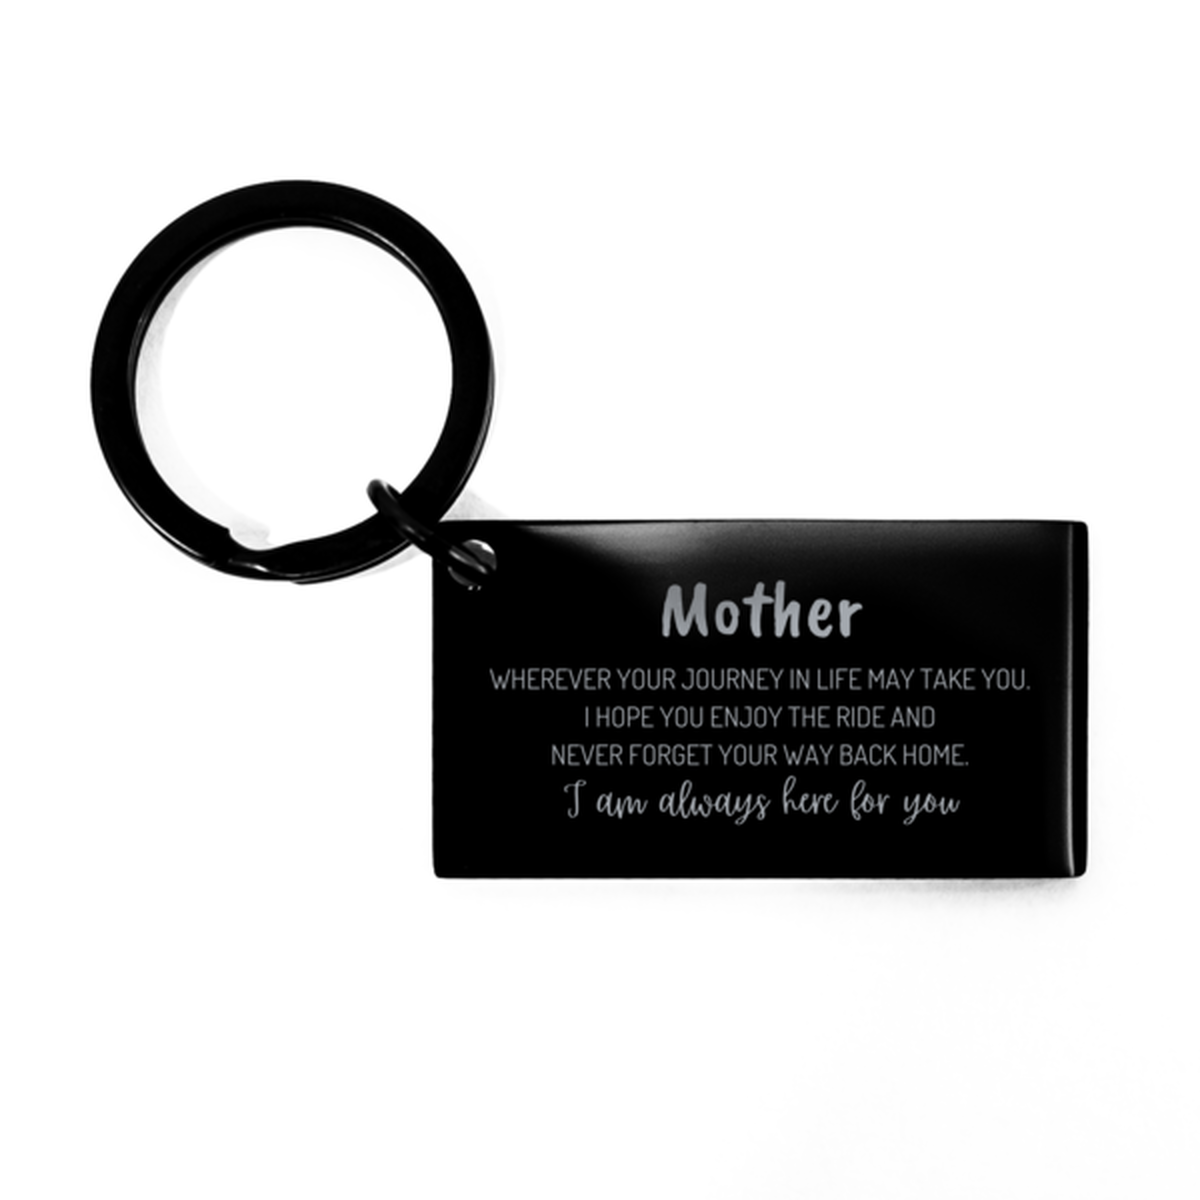 Mother wherever your journey in life may take you, I am always here for you Mother Keychain, Awesome Christmas Gifts For Mother, Mother Birthday Gifts for Men Women Family Loved One